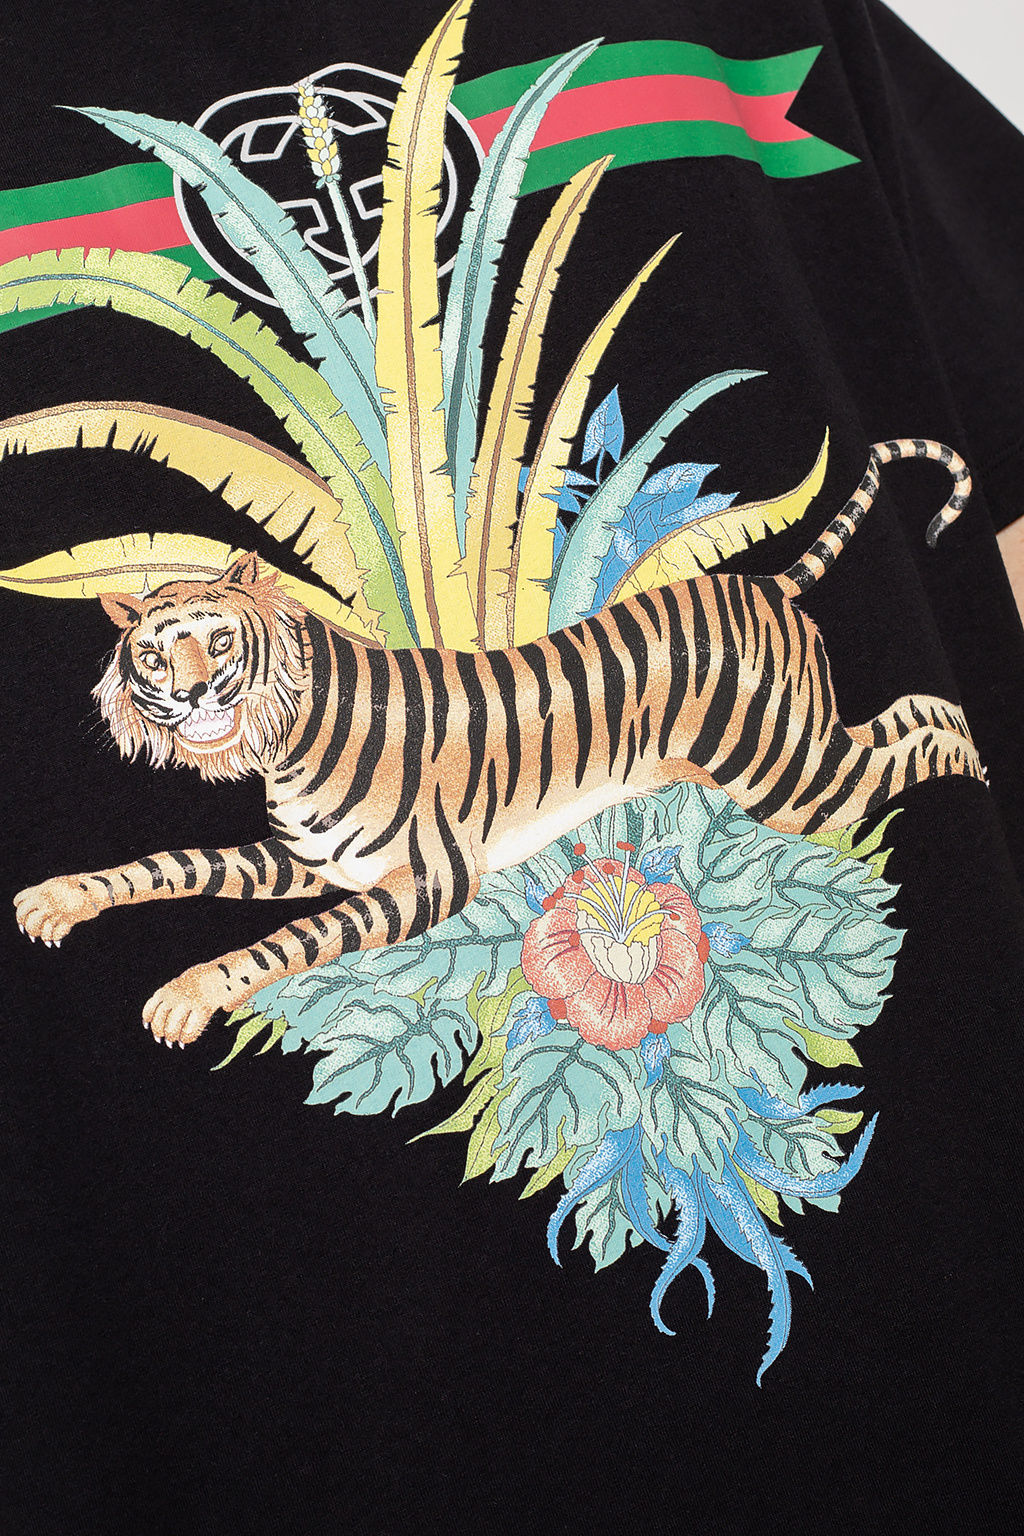 Gucci Printed T-shirt from the ‘Gucci Tiger’ collection